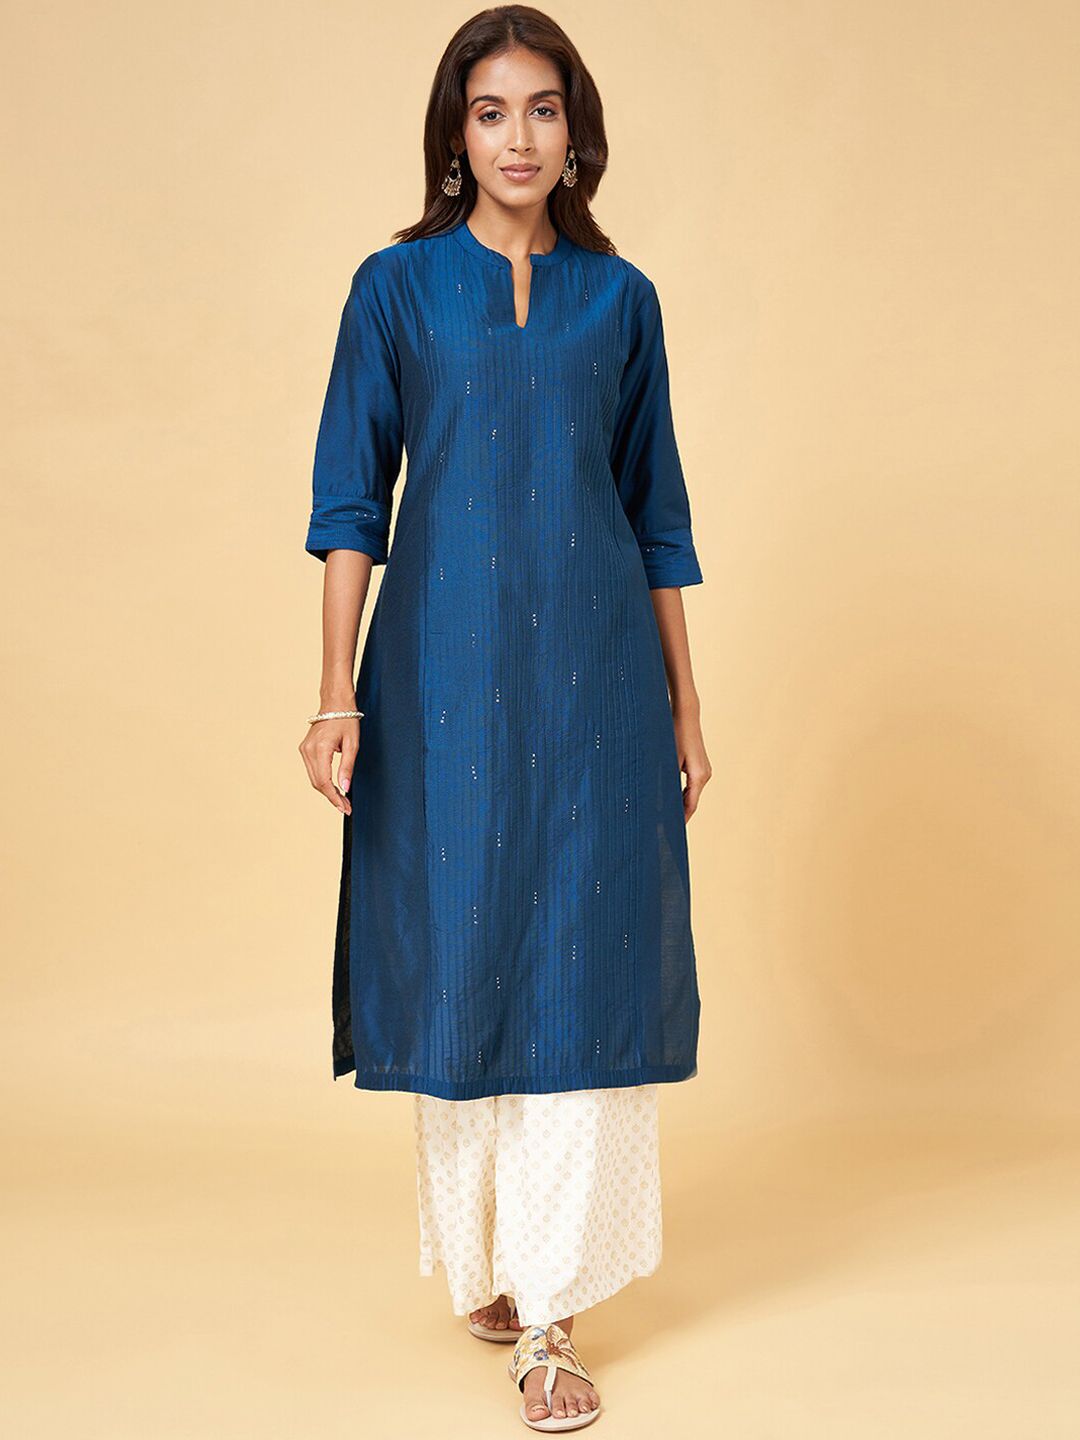 RANGMANCH BY PANTALOONS Embellished Sequined Mandarin Collar Thread Work A-Line Kurta Price in India